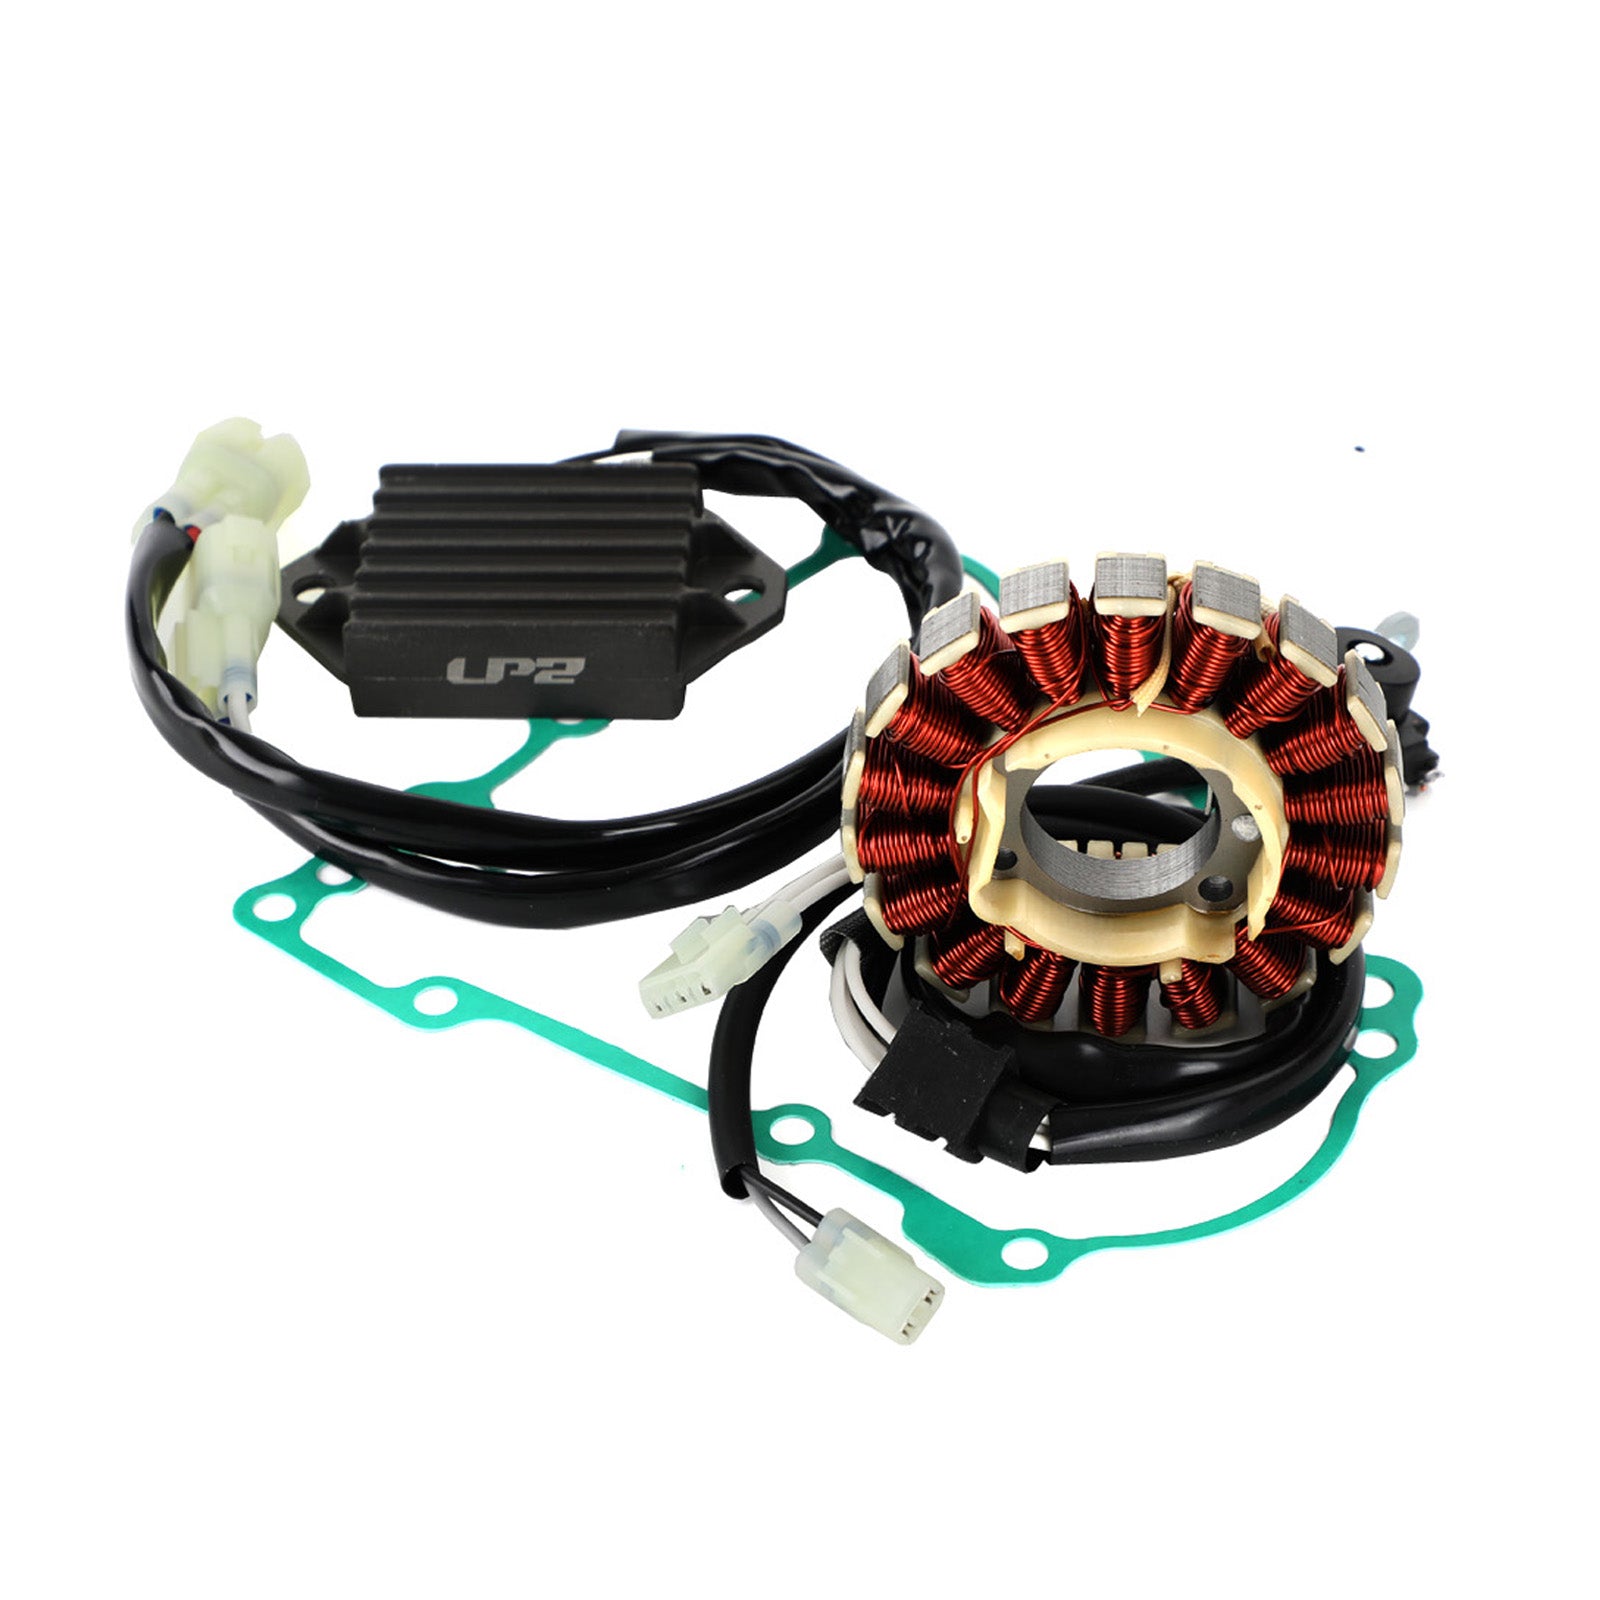 Magneto Stator+Voltage Rectifier+Gasket For Yamaha WR450F WR 450 F 2012-2015 Generic Fedex Express Shipping